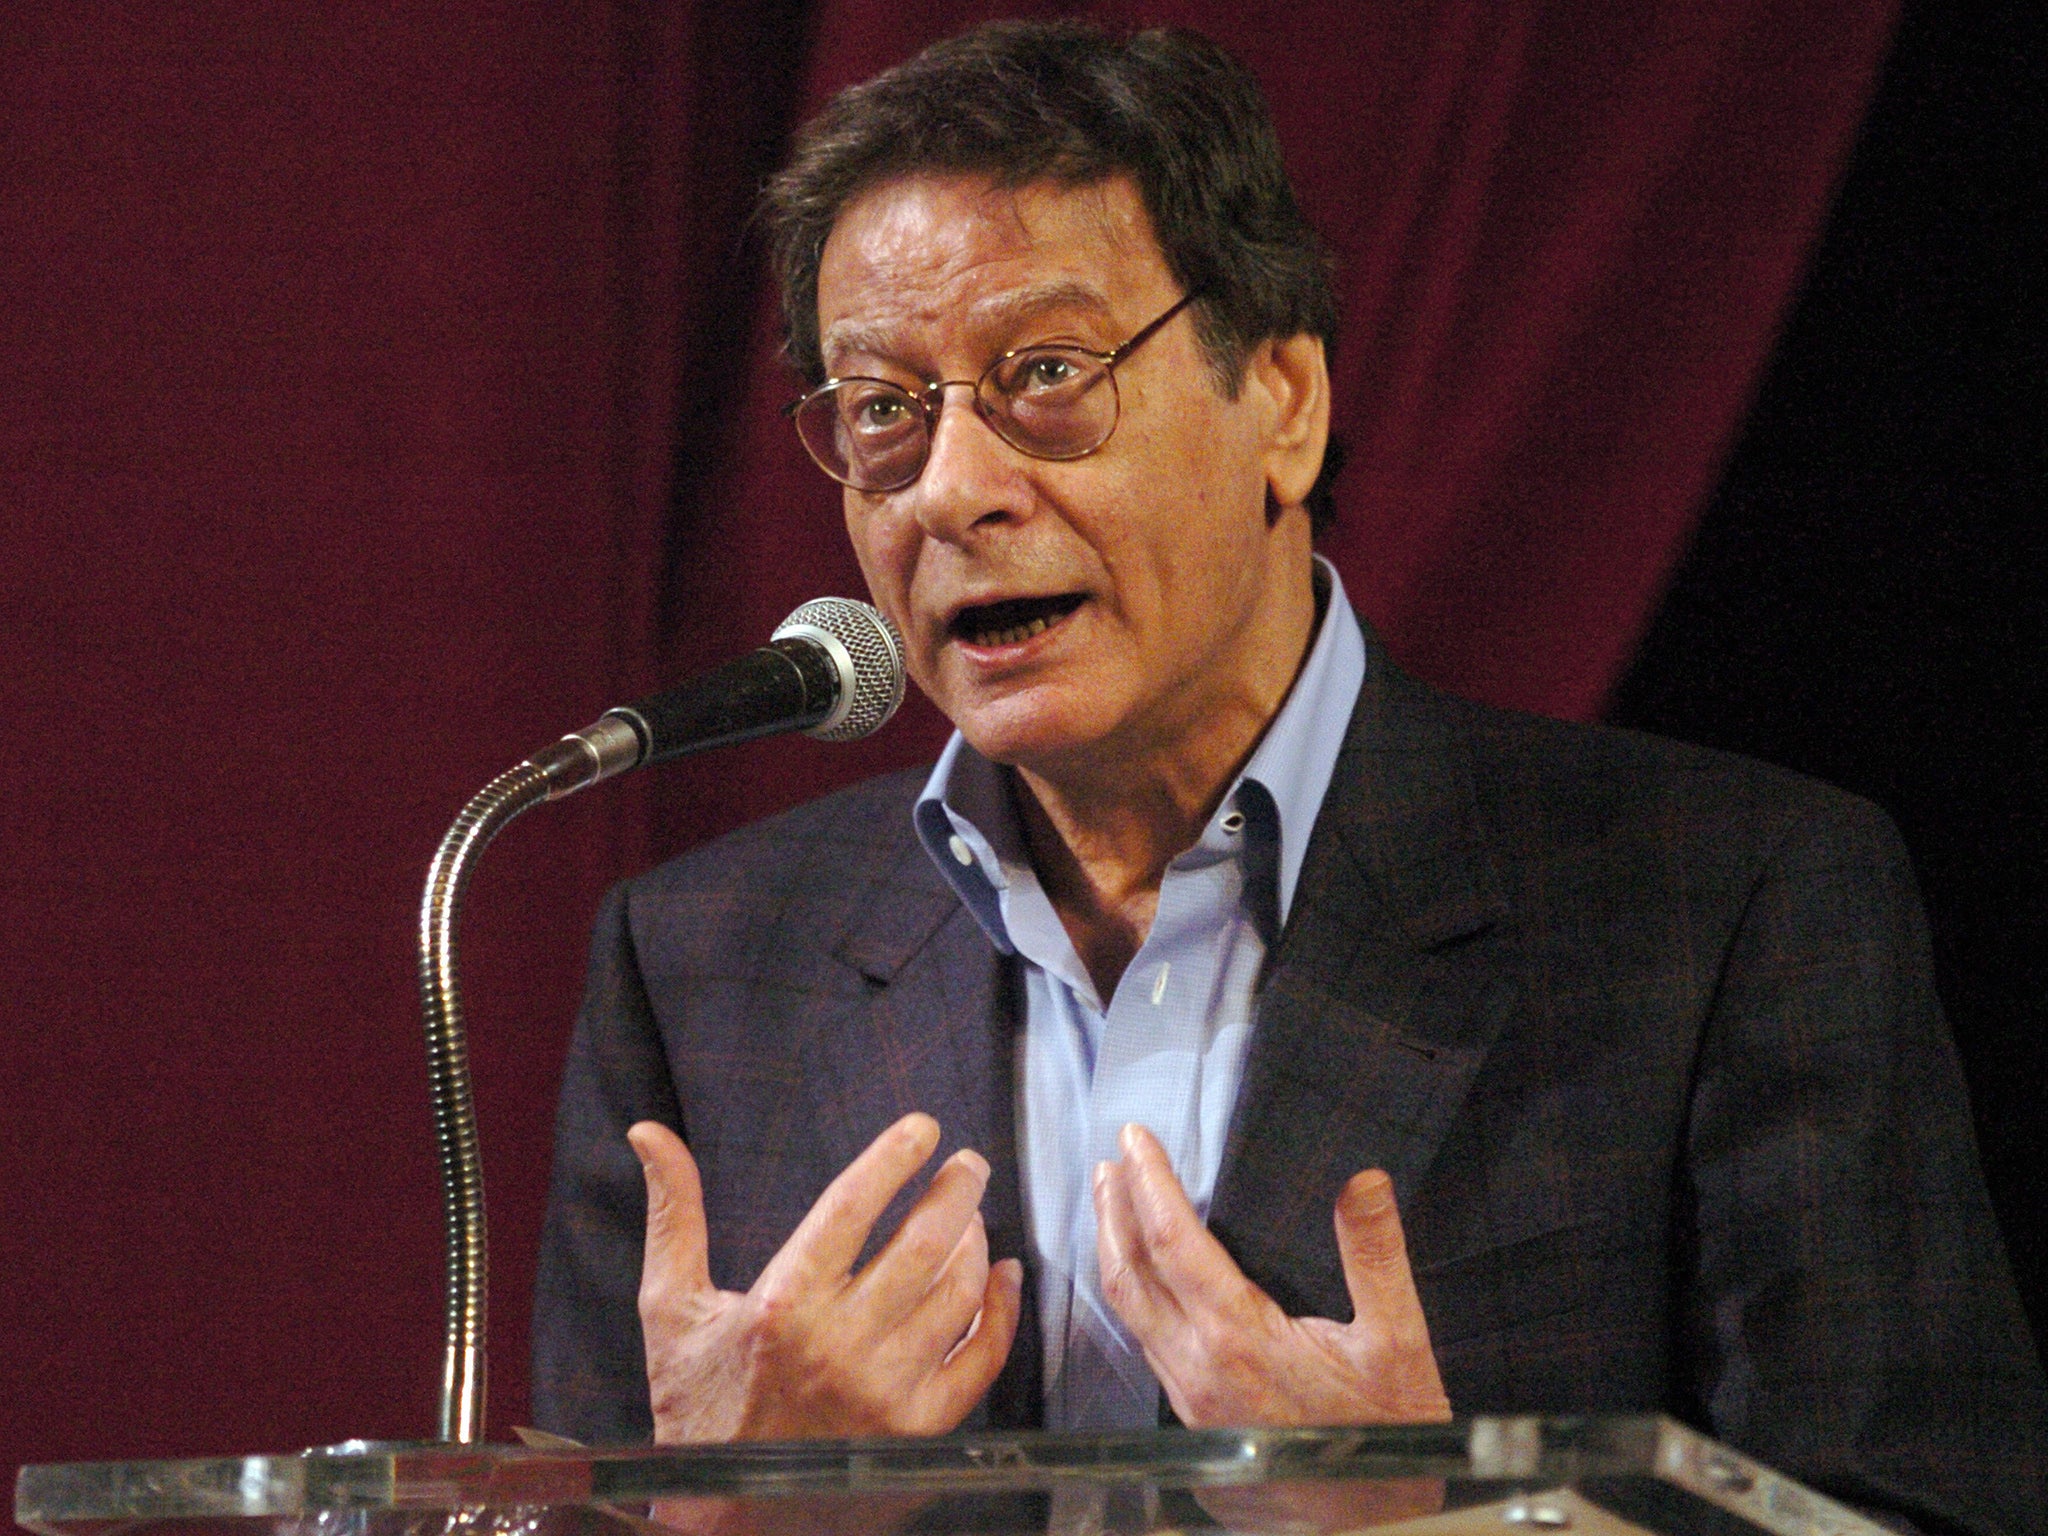 Israel's Army Radio has been criticised for featuring the work of Palestinian poet Mahmoud Darwish